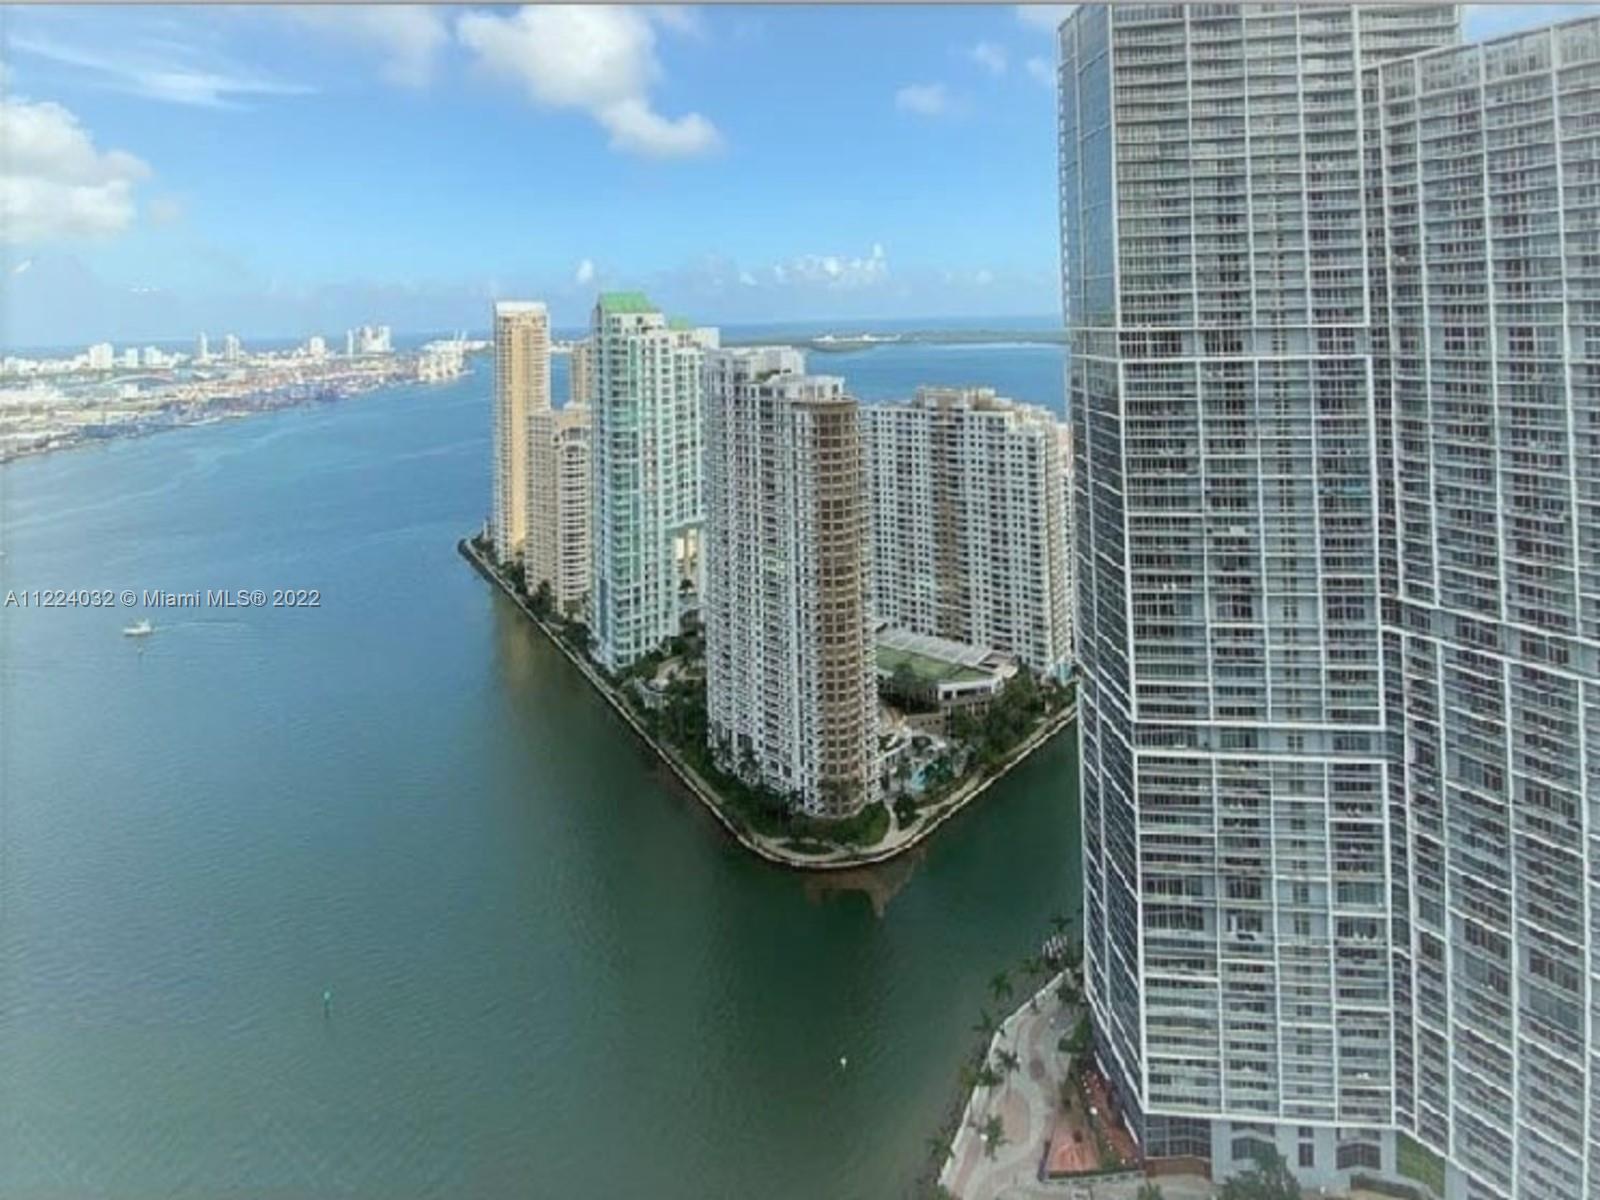 Spectacular and luxurious condo with 2 bedrooms and 2 1/2 bathrooms, located in Downtown Miami, with Snaidero kitchens, Miele appliances, oversized hydro spa in master bath and a balcony with a wonderful view of Downtown, the river and ocean.  Association includes internet access, basic TV and hot water, residences enjoy all the amenities of the hotel including pools, poolside cabanas, 24 hour valet parking, full-service concierge service and more. Great investment opportunity or a great place to call home.